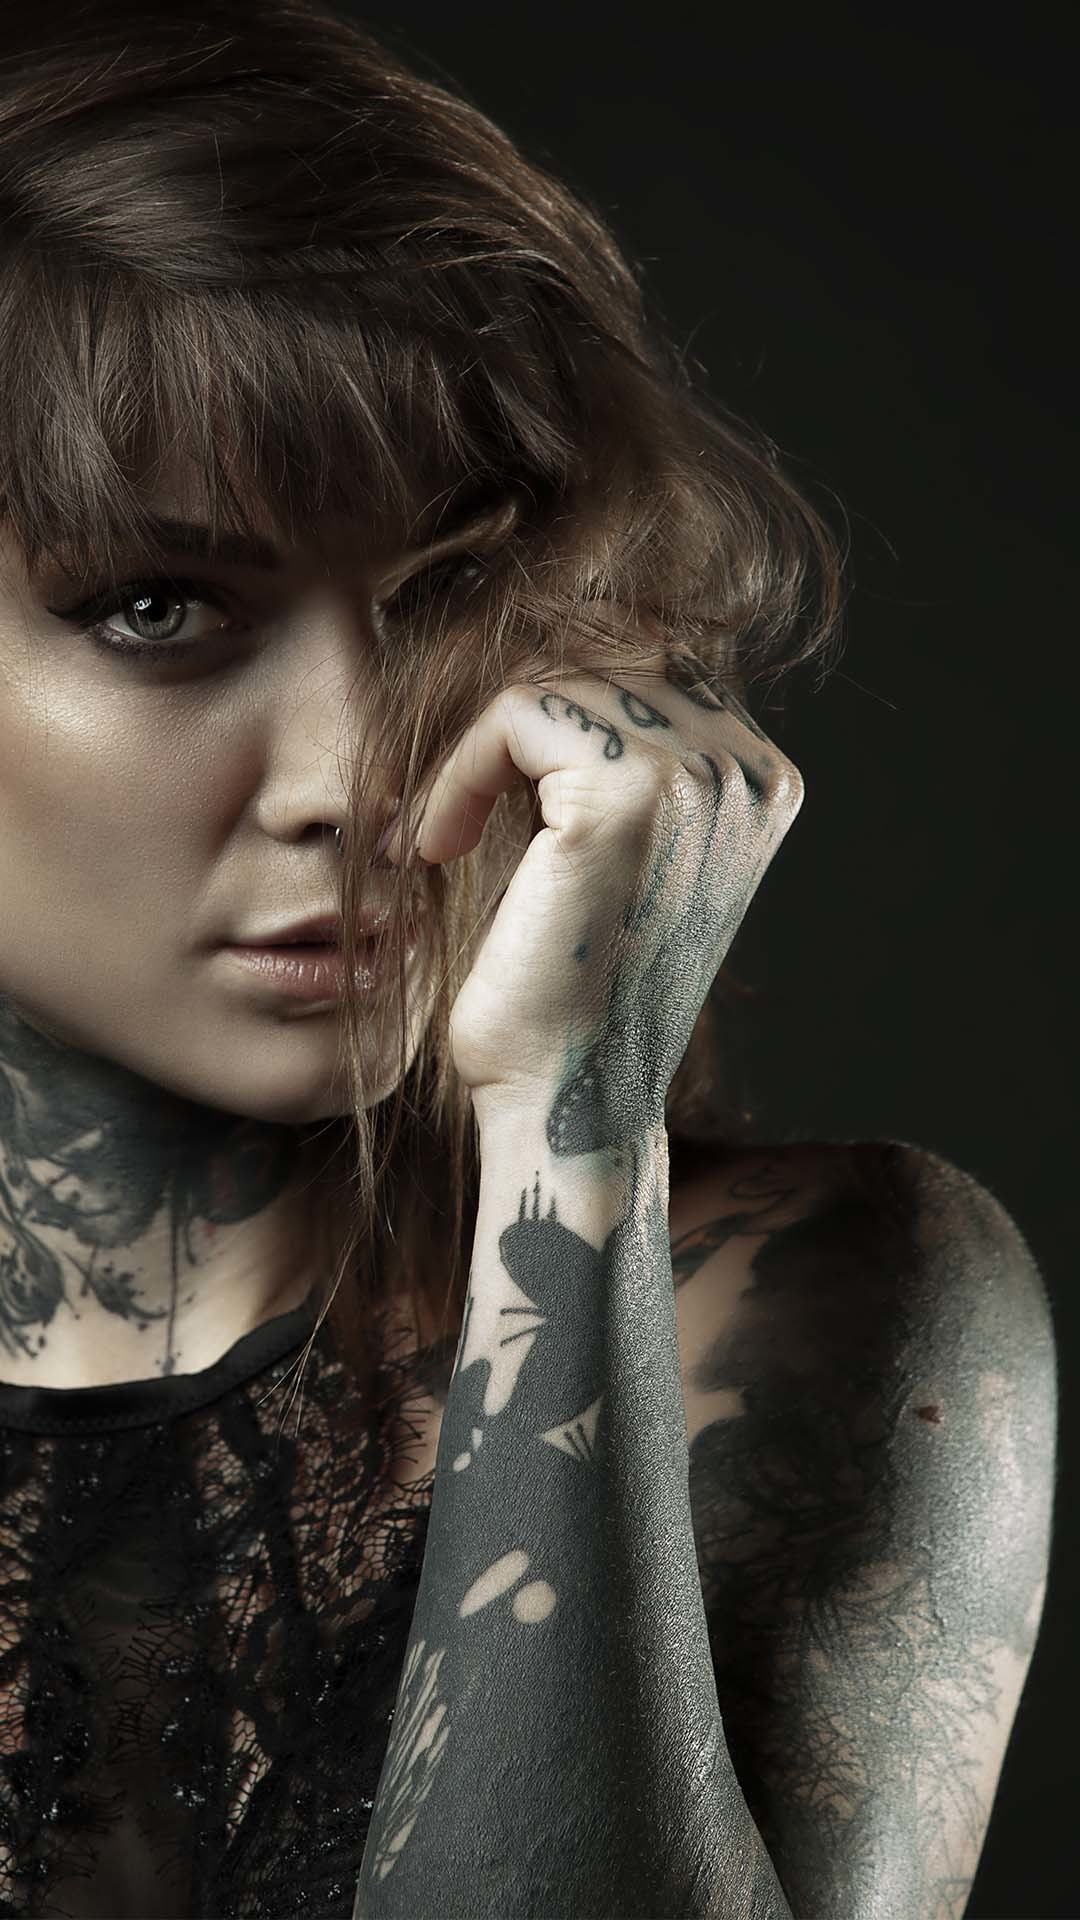 1080x1920 Tattooed Girl - Wallpaper for iPhone 7